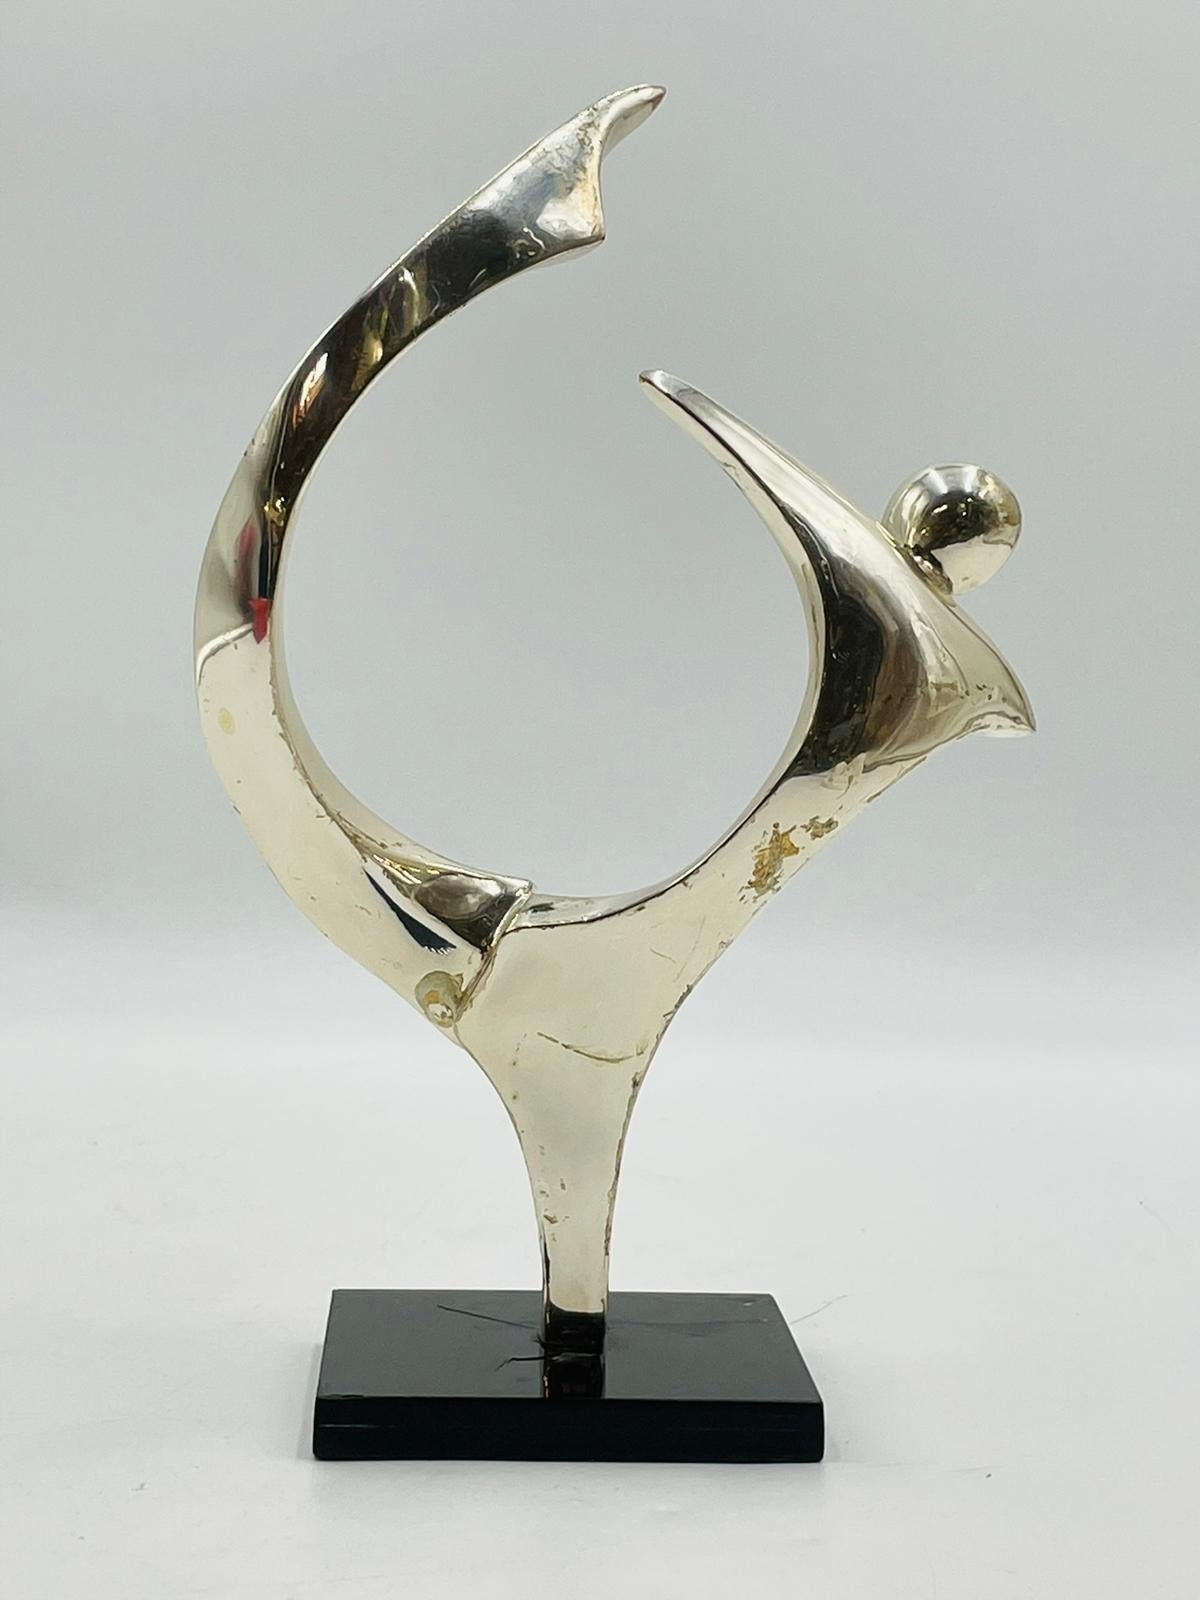 Organic Modern Nickel Plated Bronze Sculpture by Kieff Grediaga #4/10 Signed For Sale